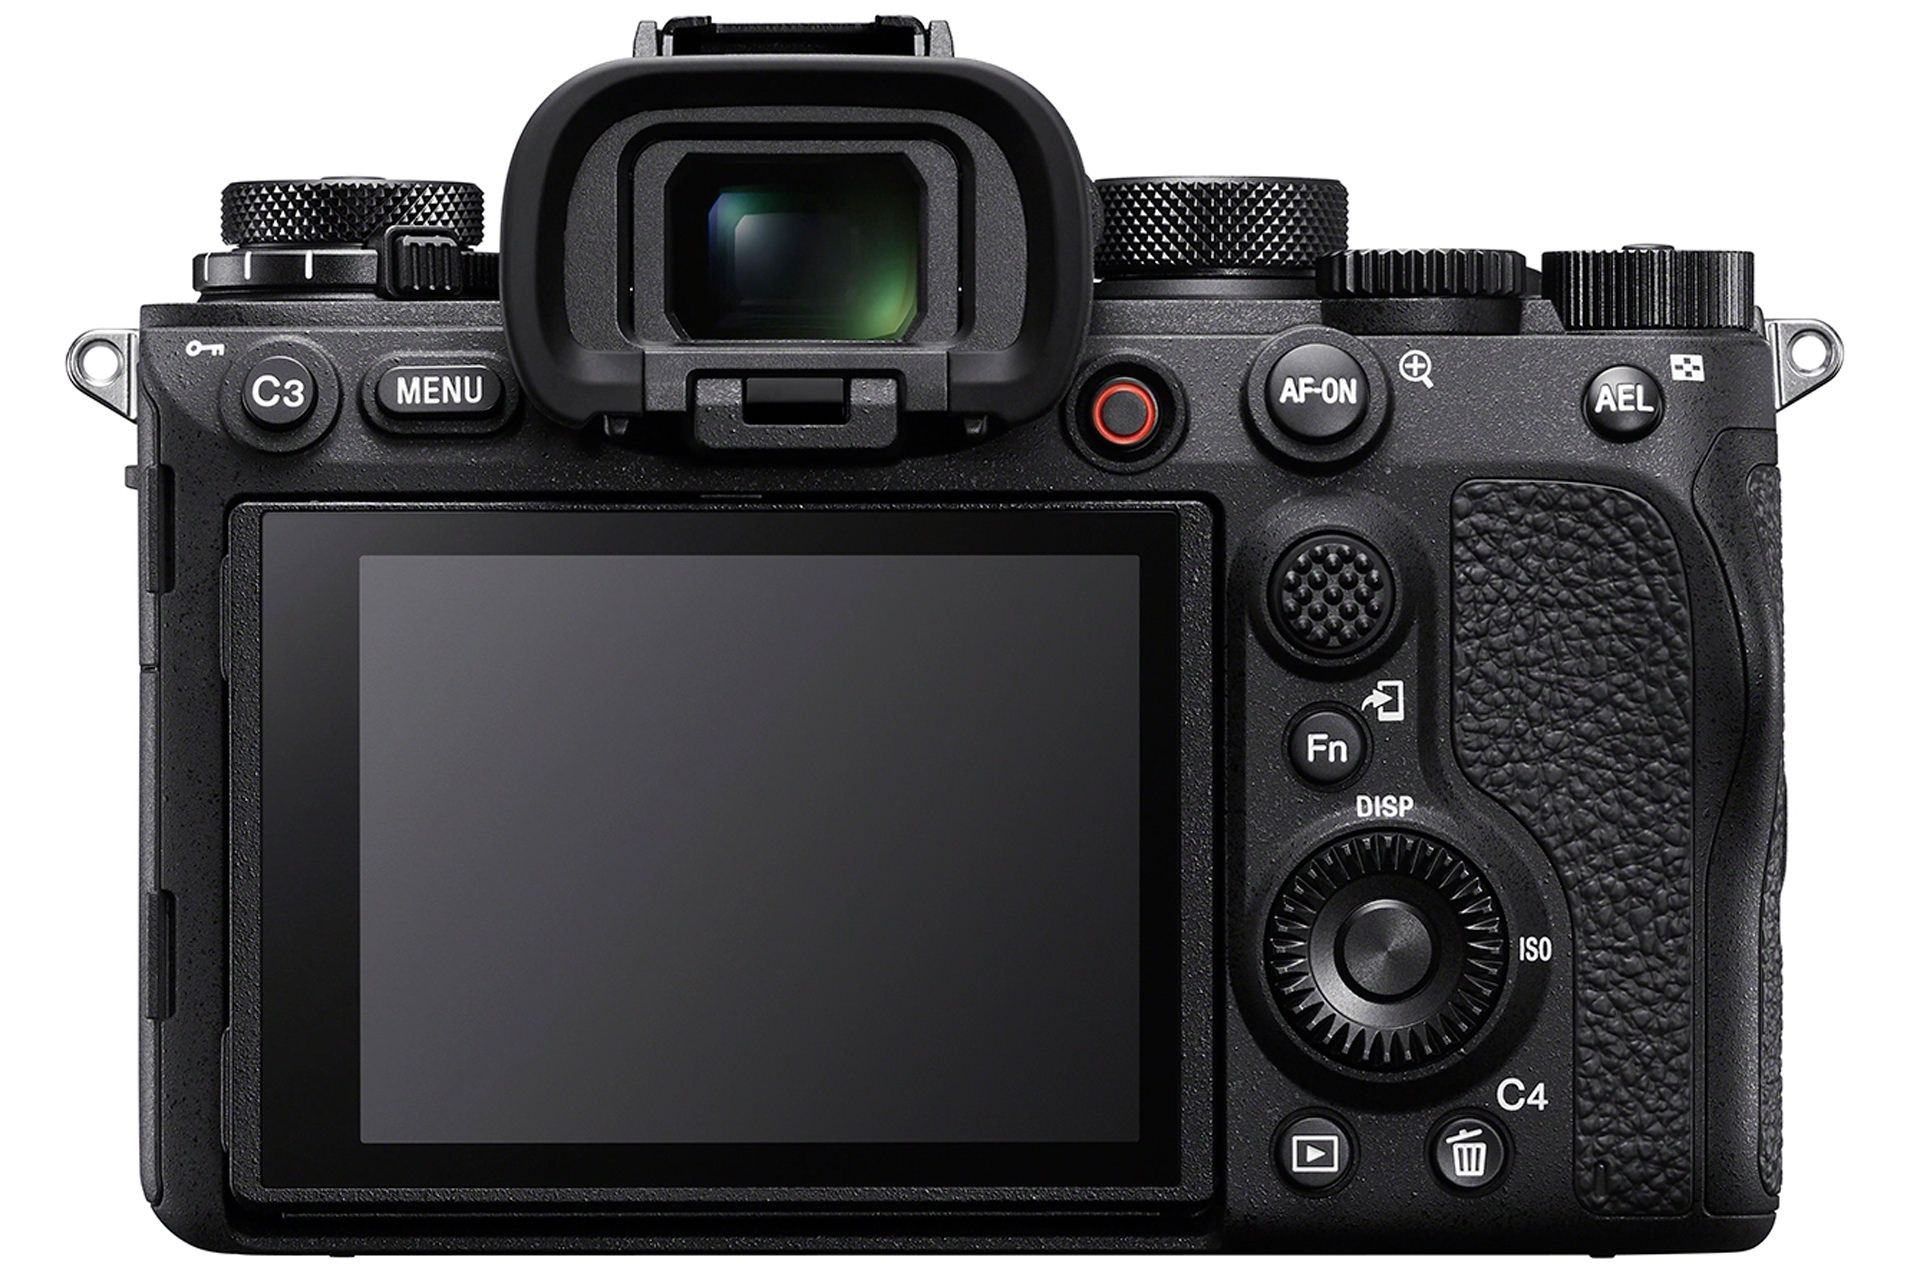 The back panel of the Sony Alpha 1 includes an LCD, viewfinder and buttons